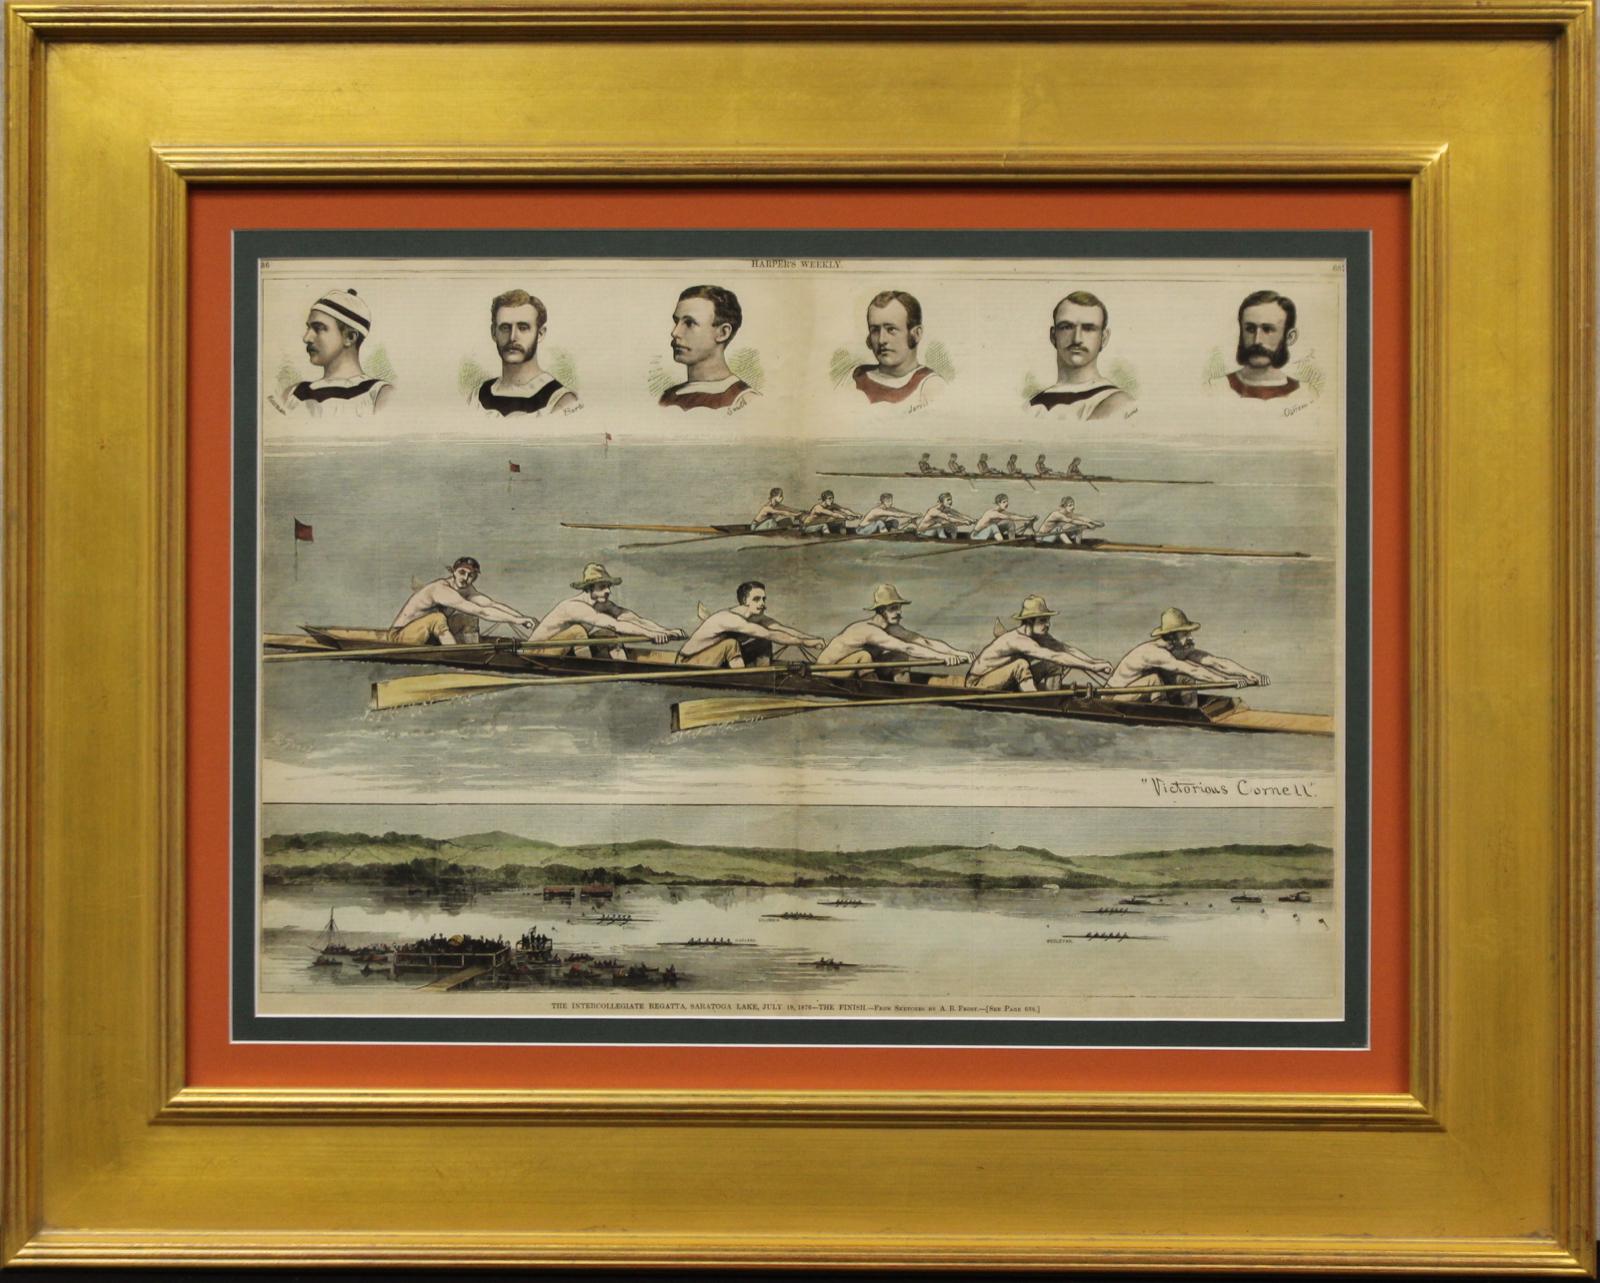 Art Sz: 15"H x 21"W

Frame Sz: 25"H x 31"W

Harper's Weekly colour plate from sketches by A.B. Frost depicting 'The Intercollegiate Regatta, Saratoga Lake, July 19, 1876- The Finish'